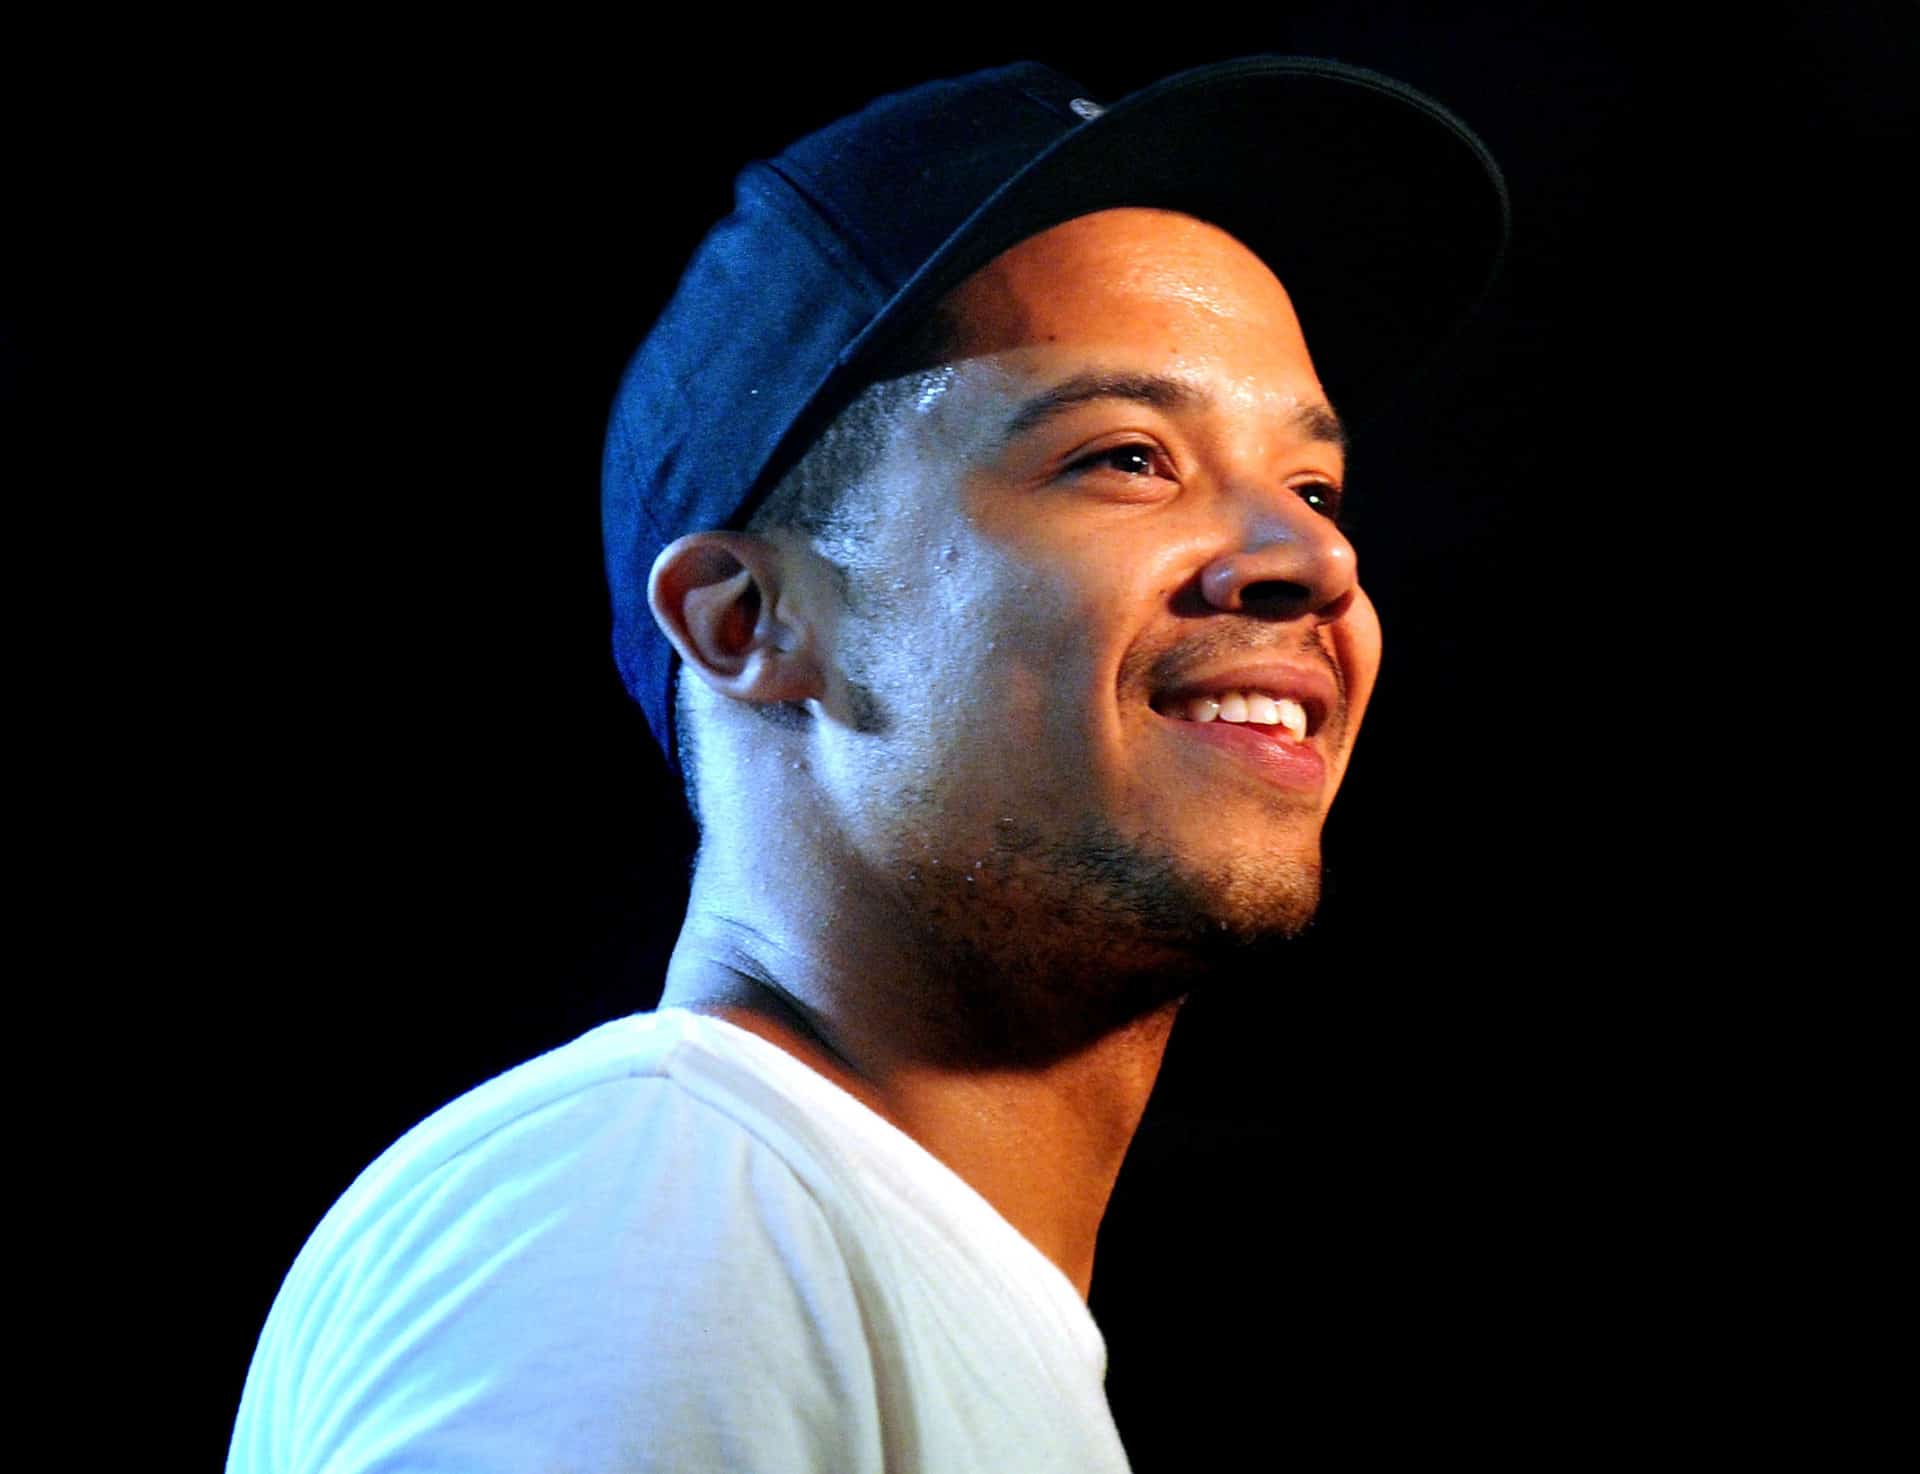 'Game Of Thrones' Isn't The End For Jacob Anderson Because He's Just Getting Started